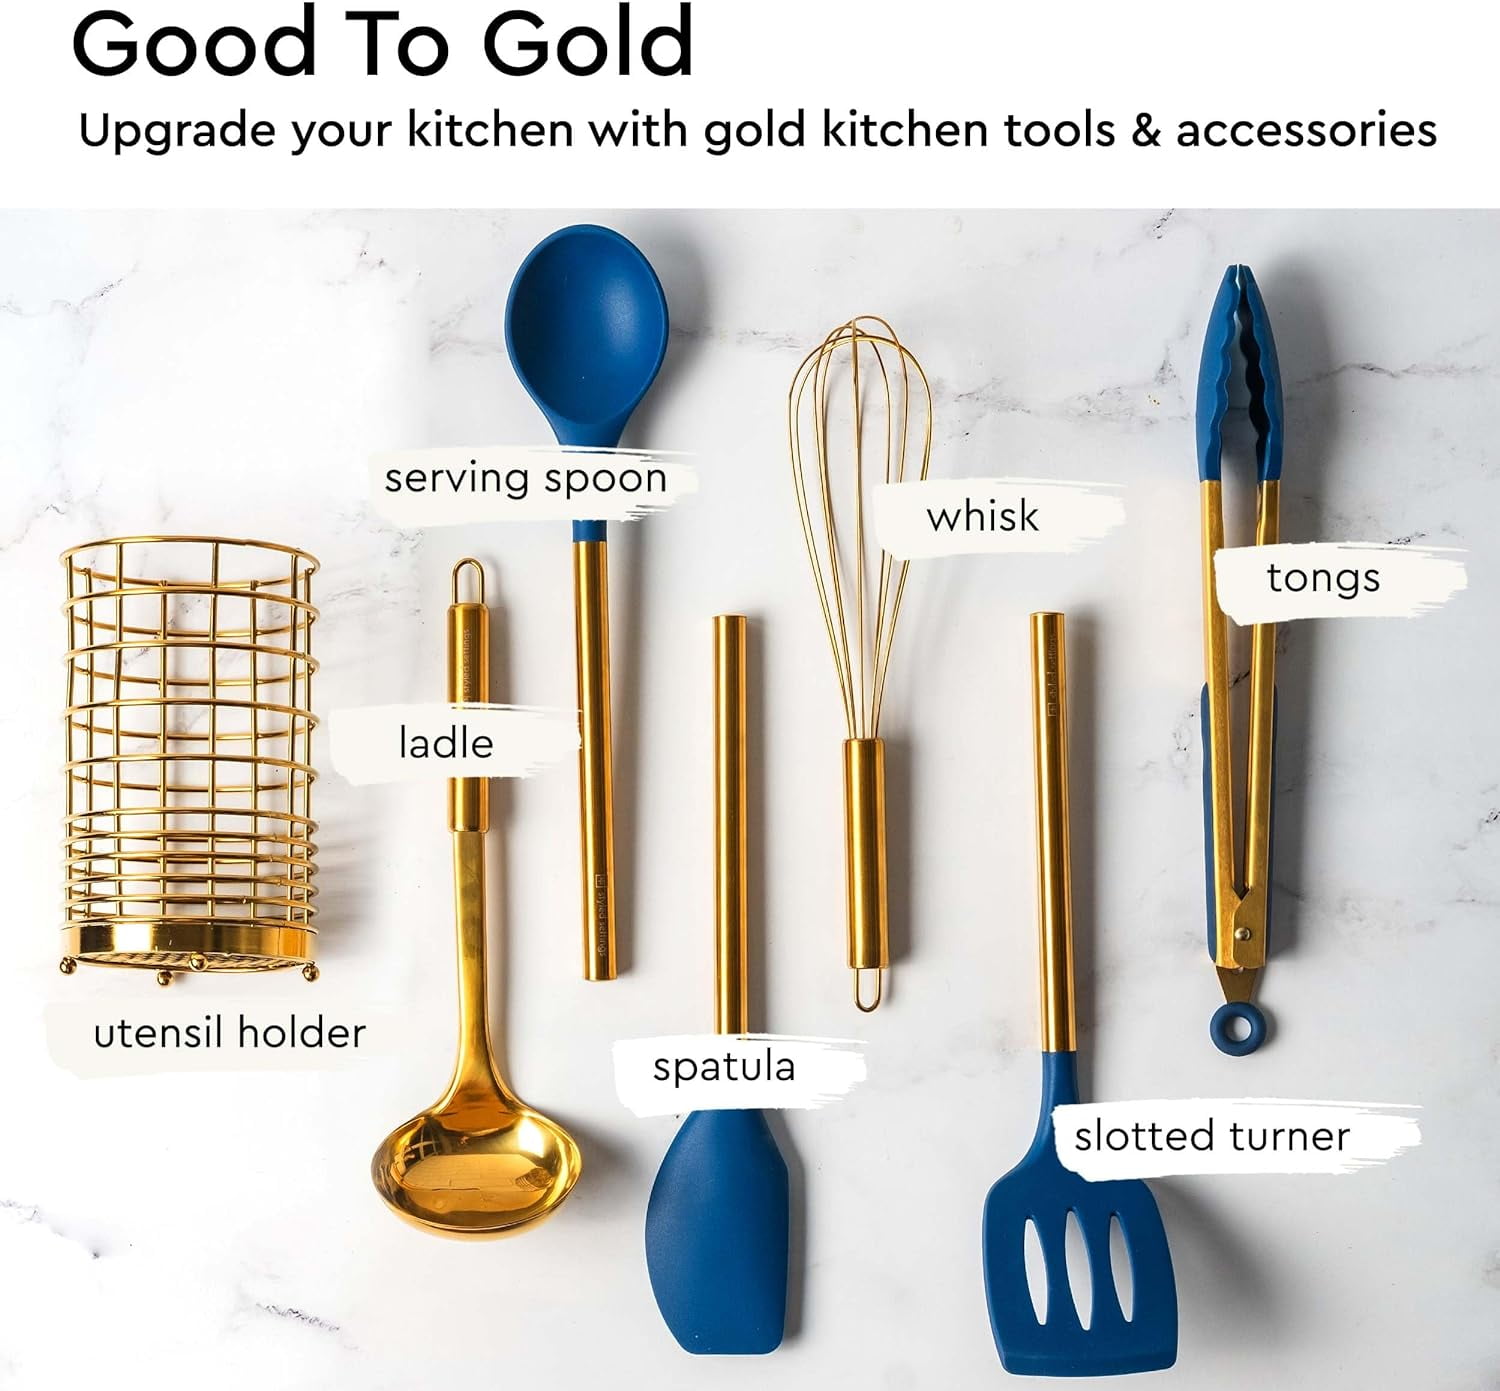 Teal Kitchen Utensils Set with Holder - 17PC Teal & Gold Cooking